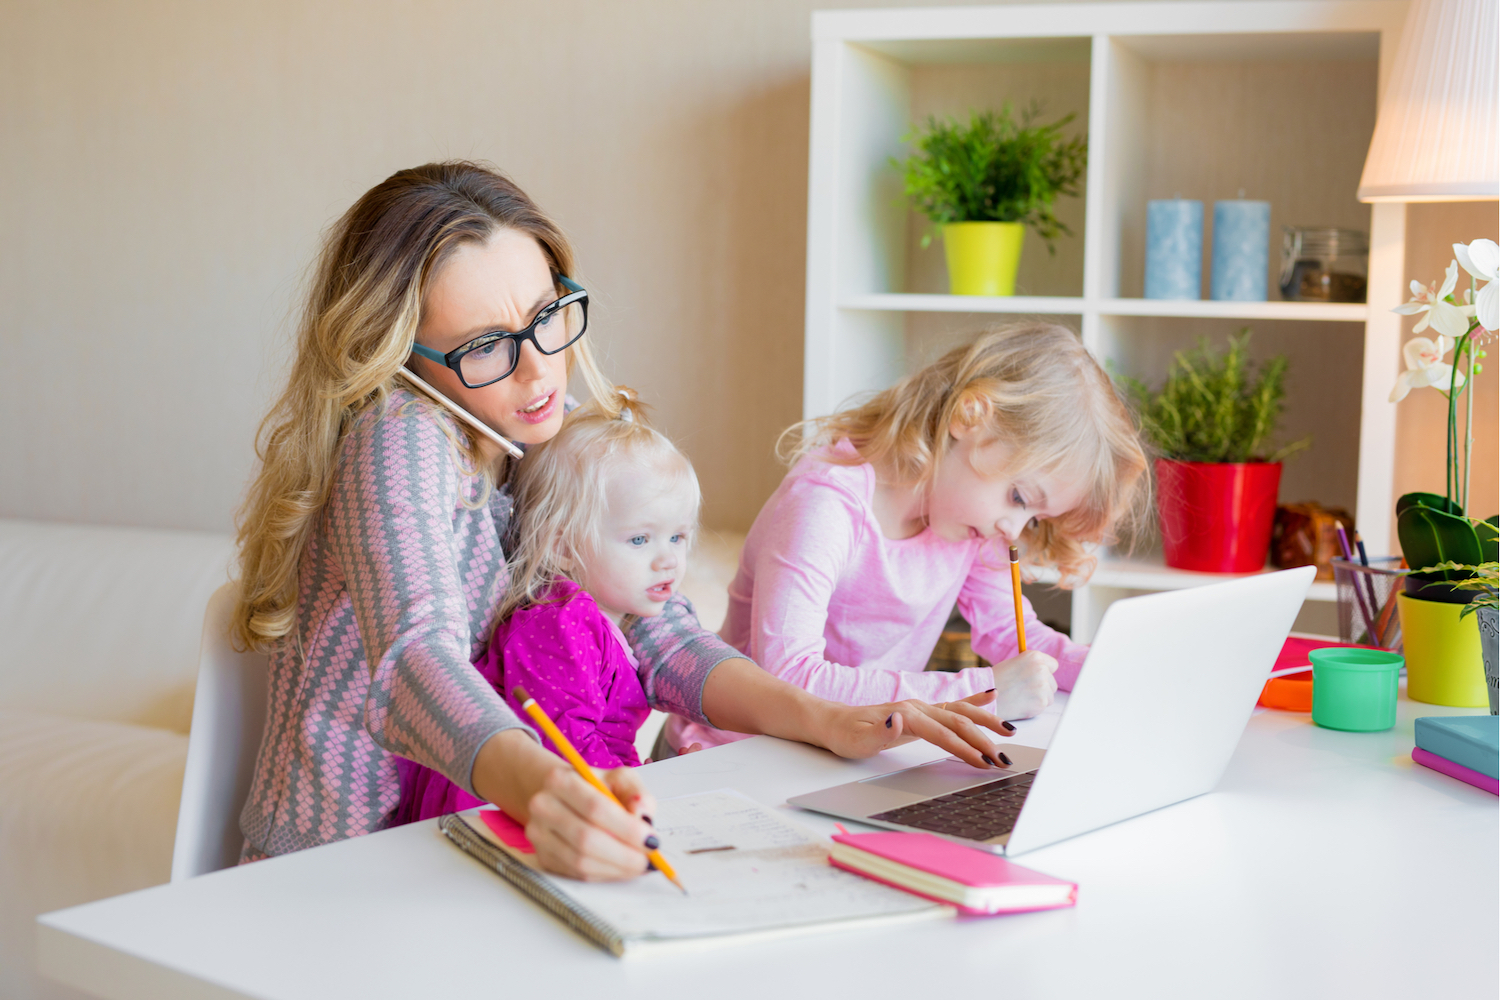 Covid Tech Took a Toll on Work-From-Home Moms